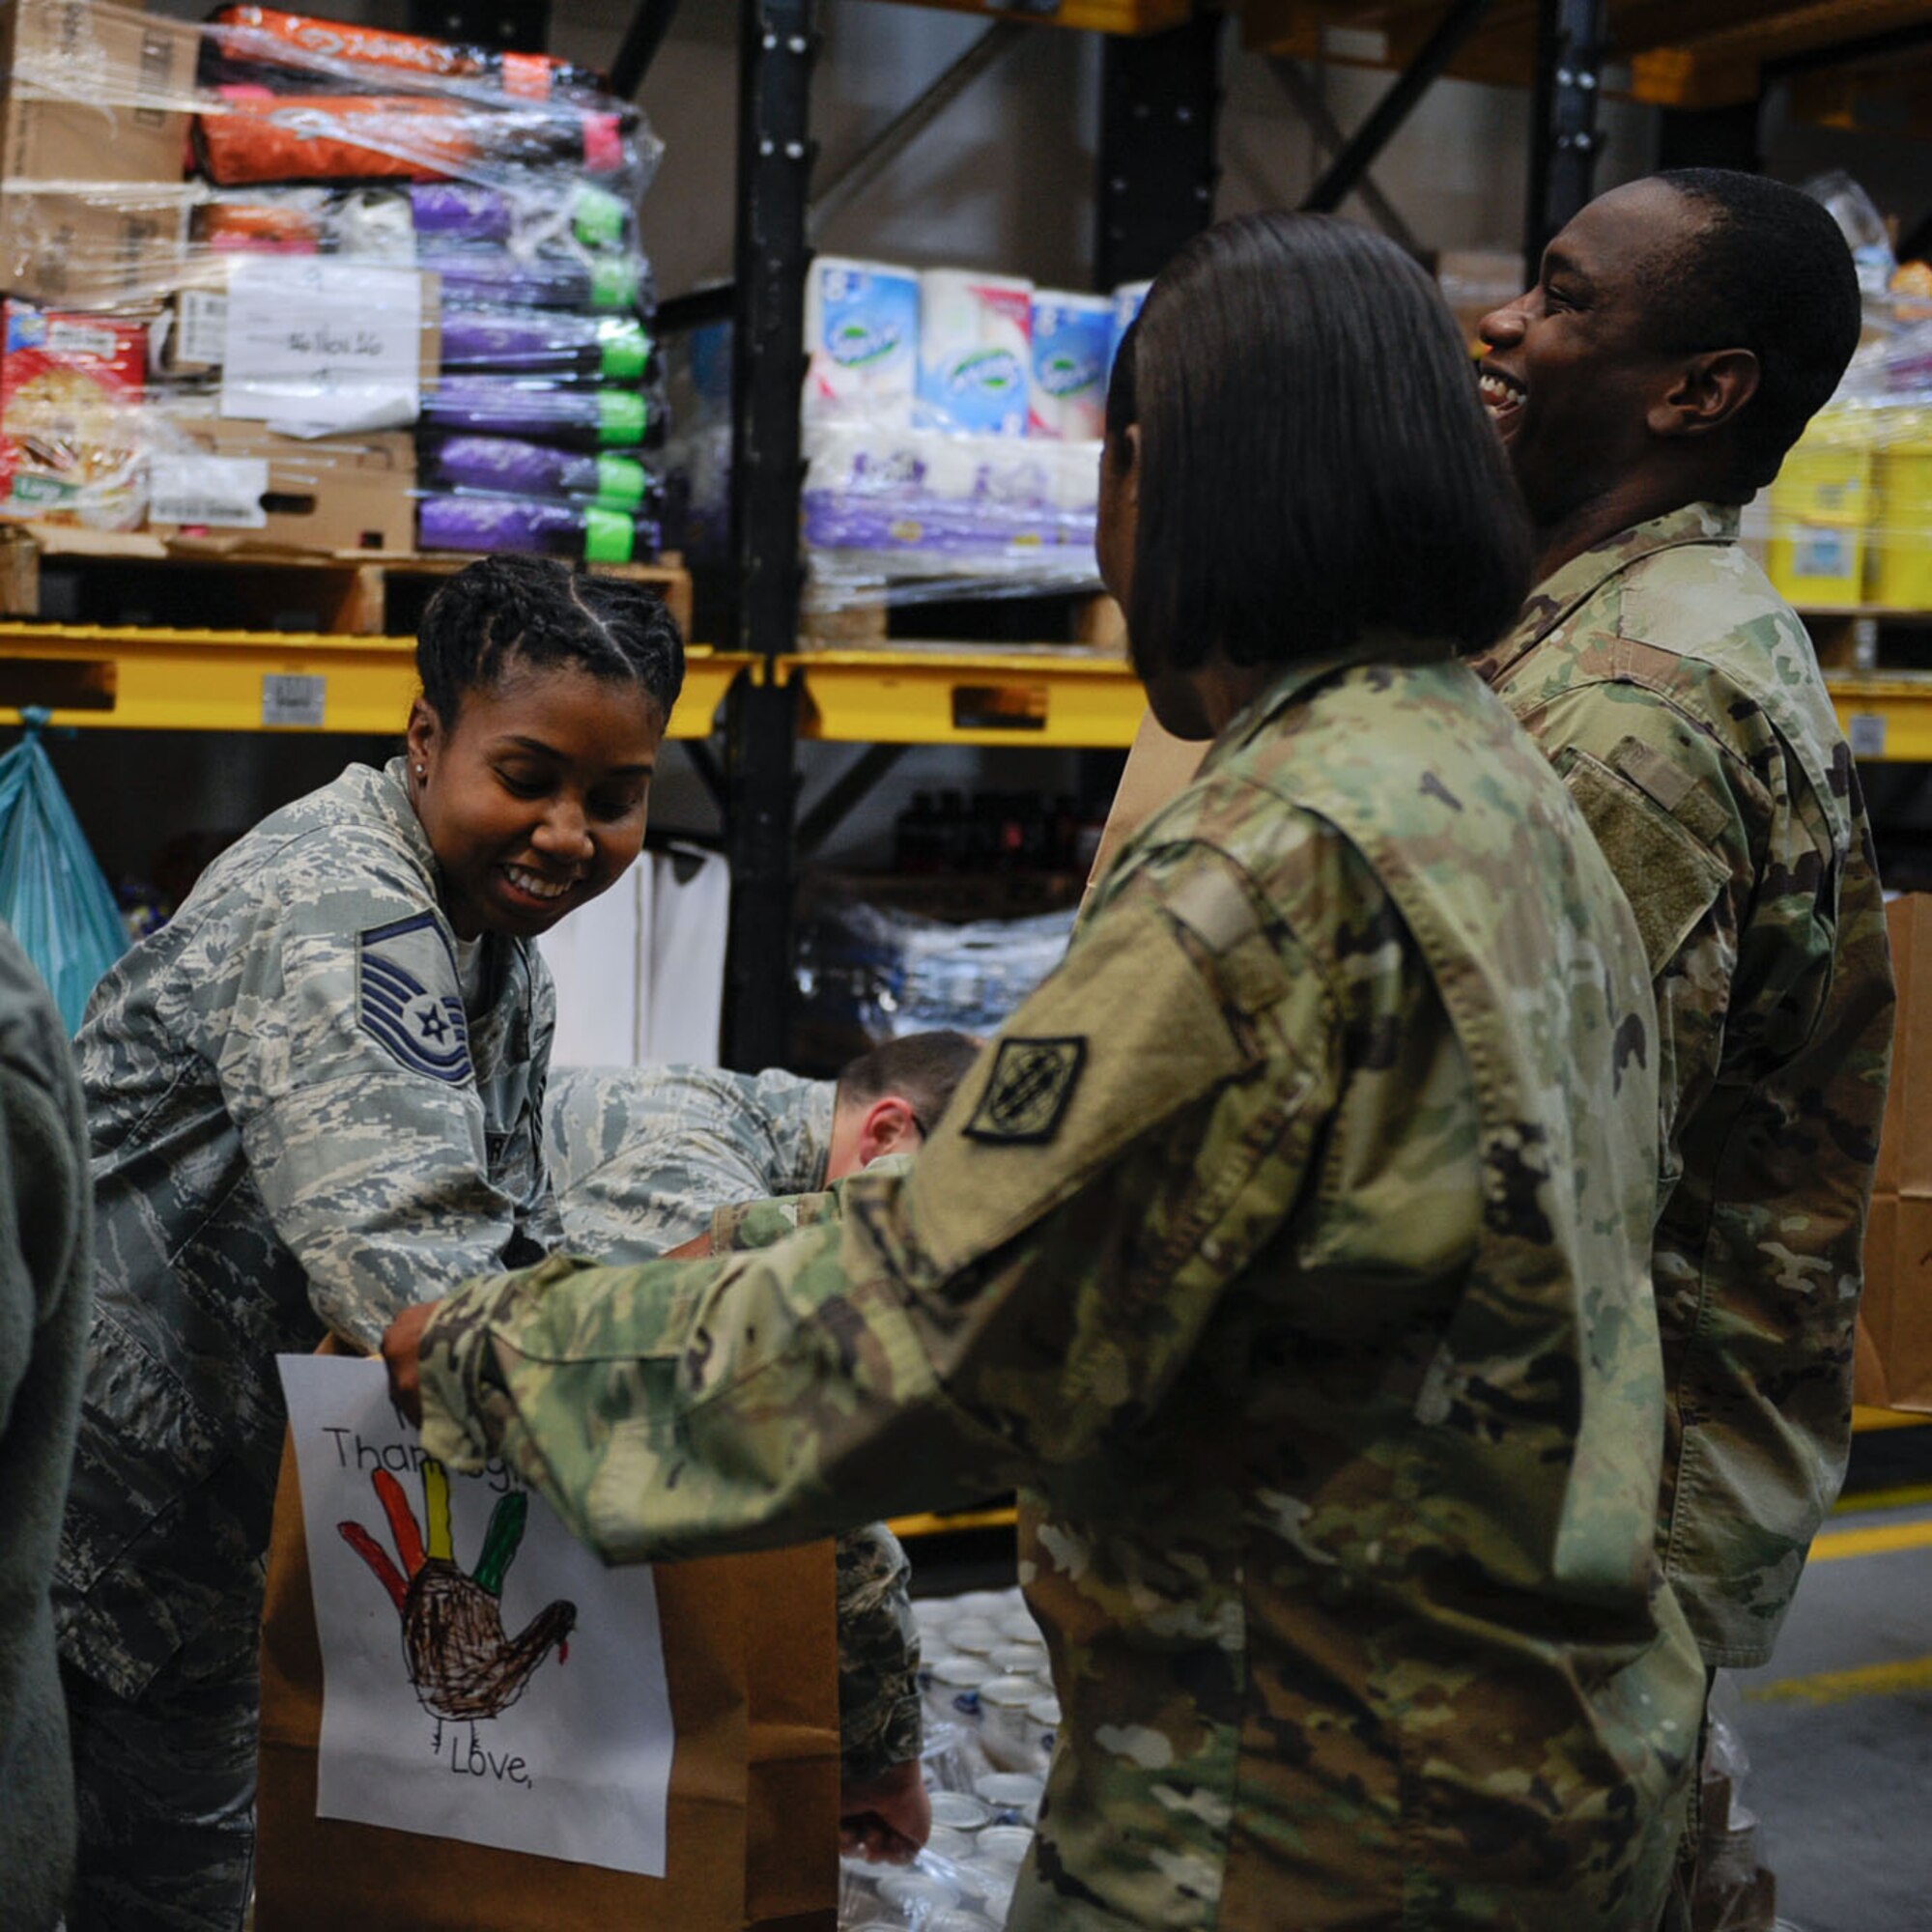 Master Sgt. Phyllis Brooks, 1st Combat Communications Squadron combat operations section chief, fills a bag with supplies for the Thanks for Thanksgiving event at Vogelweh Air Base. Germany, Nov. 19, 2016. Students from surrounding Kaiserslautern Military Community elementary schools decorated brown bags with feathers and drawings of turkeys. Each package included a 10-12 lb. frozen turkey, a roasting pan, stuffing mix, gravy, cranberry sauce, mashed potatoes, vegetables, yams, dinner rolls, a frozen pie, and a $25 Visa gift card. (U.S. Air Force photo by Airman 1st Class Savannah L. Waters)